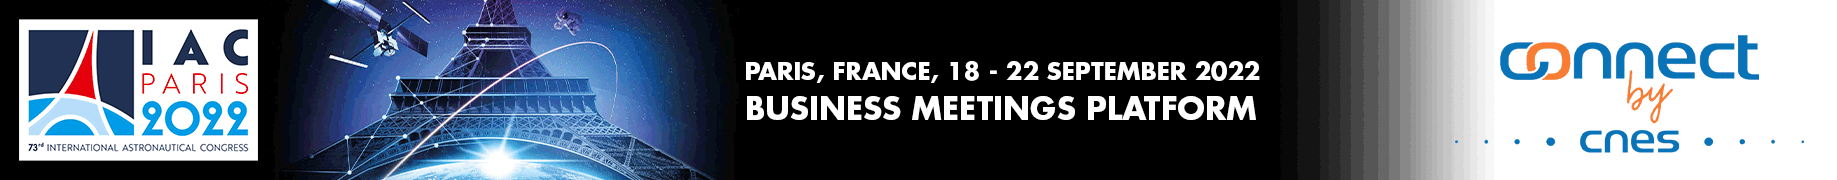 CONNECT BY CNES BUSINESS MEETINGS 2022